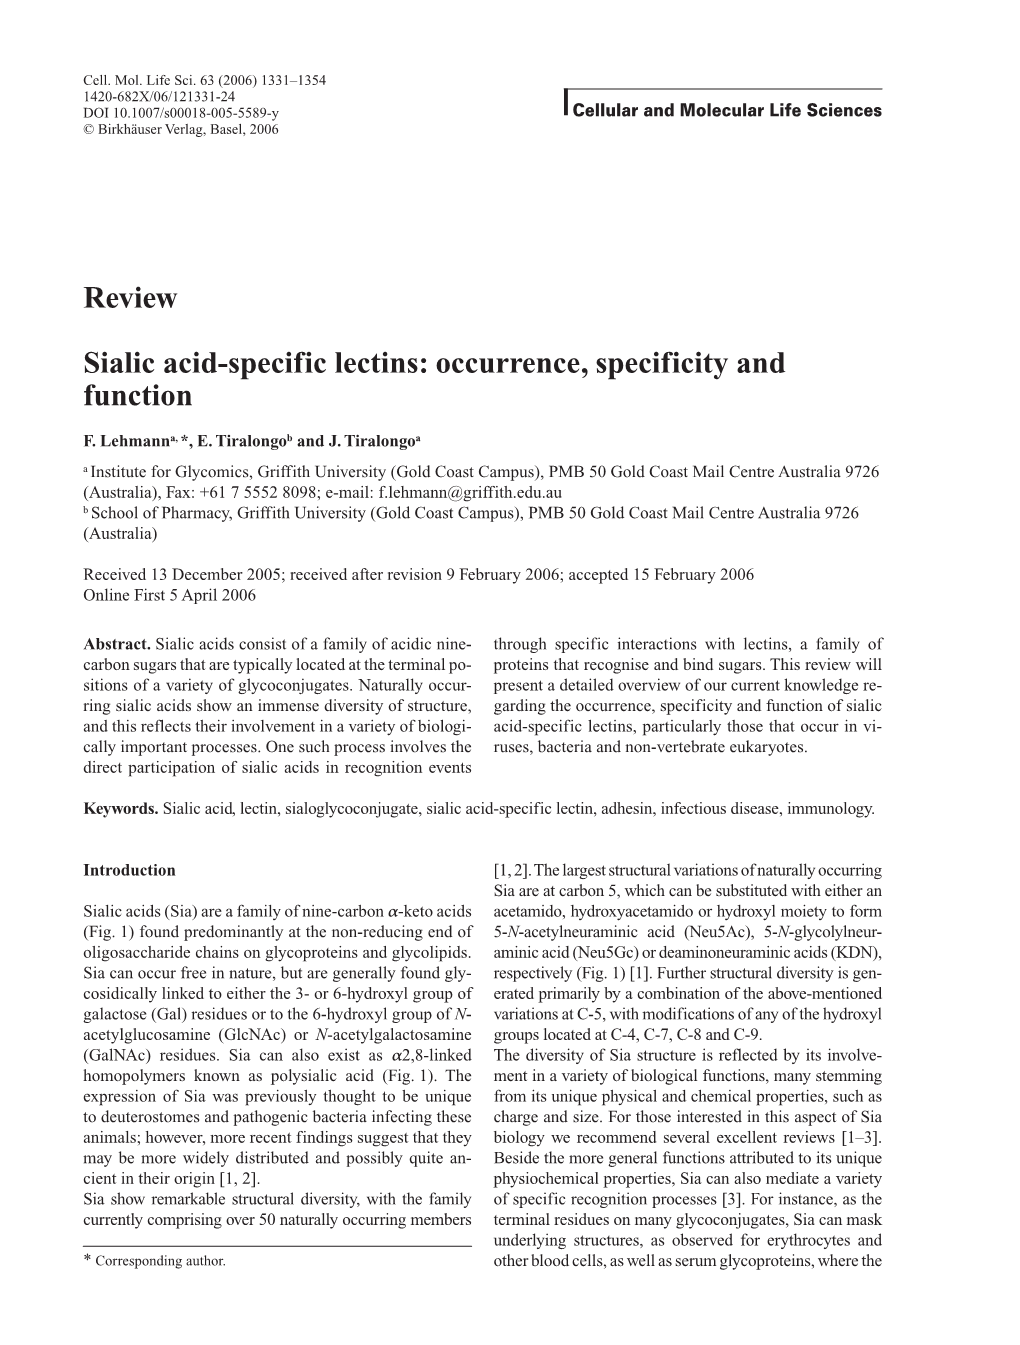 Review Sialic Acid-Specific Lectins: Occurrence, Specificity and Function